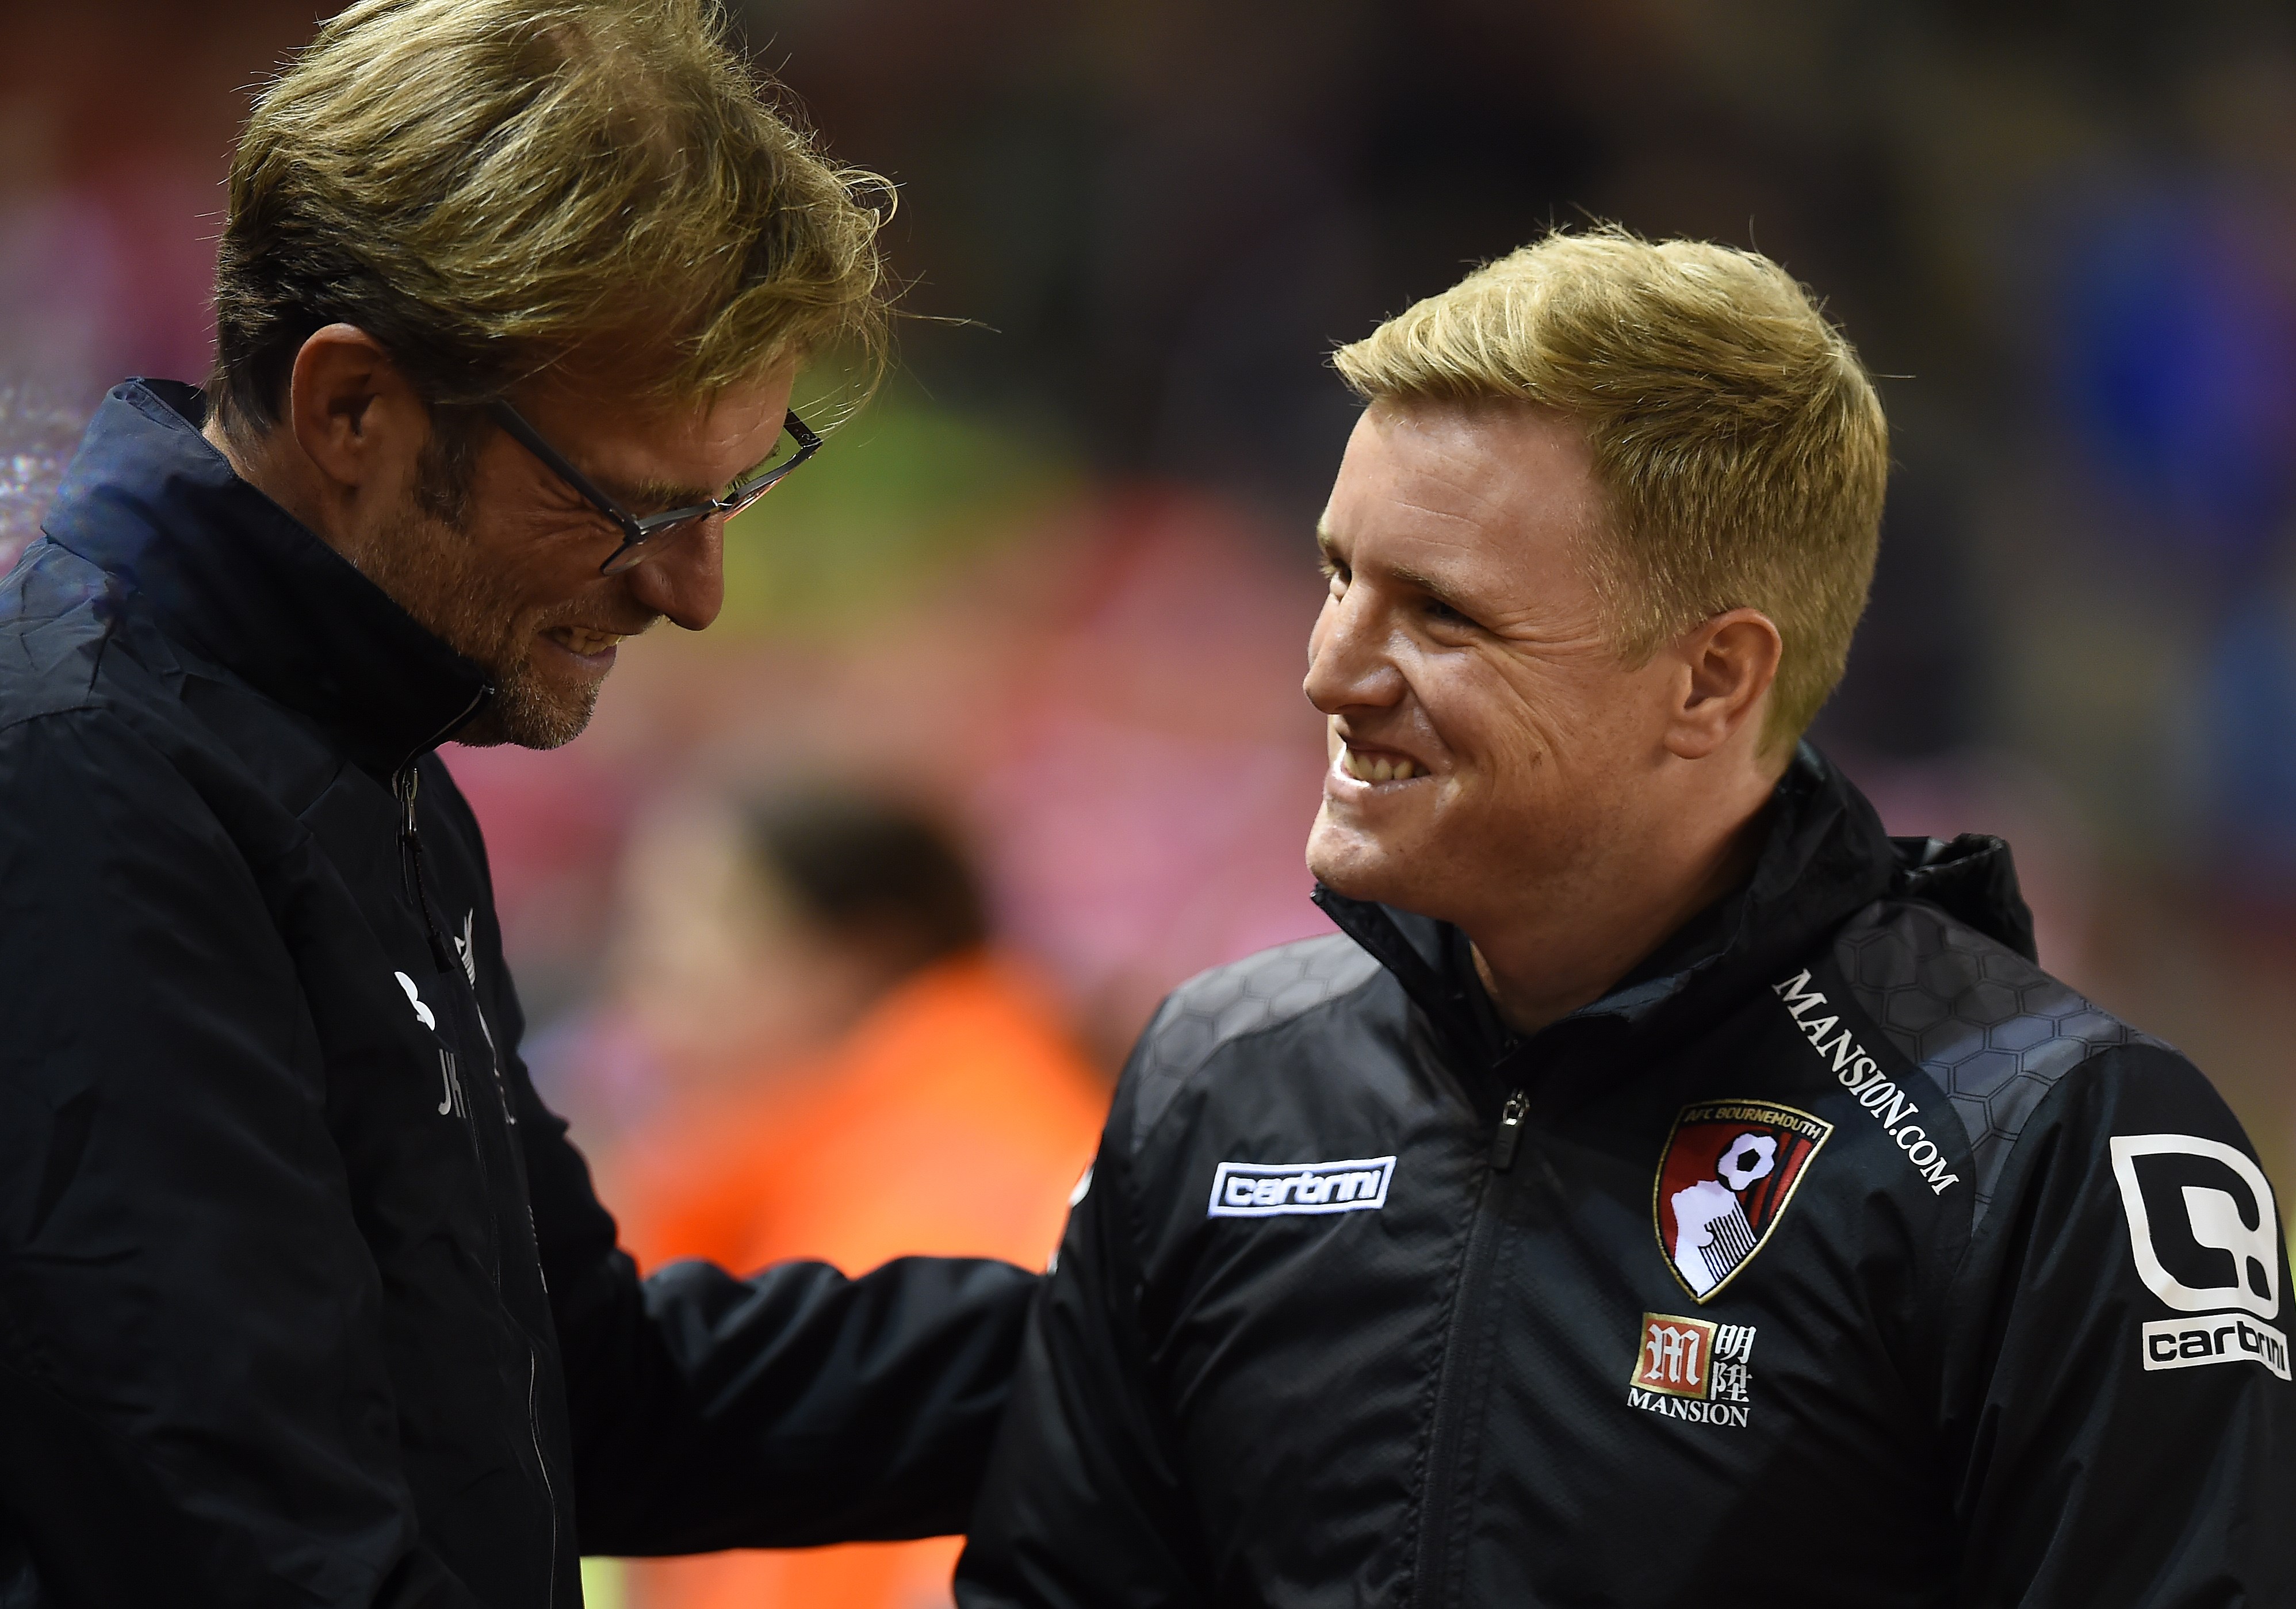 Liverpool's German manager Jurgen Klopp (L) shakes hands with Bournemouth's English manager Eddie Howe ahead of the English League Cup fourth round football match between Liverpool and Bournemouth at Anfield stadium in Liverpool, north west England on October 28, 2015. AFP PHOTO / PAUL ELLIS

RESTRICTED TO EDITORIAL USE. NO USE WITH UNAUTHORIZED AUDIO, VIDEO, DATA, FIXTURE LISTS, CLUB/LEAGUE LOGOS OR 'LIVE' SERVICES. ONLINE IN-MATCH USE LIMITED TO 75 IMAGES, NO VIDEO EMULATION. NO USE IN BETTING, GAMES OR SINGLE CLUB/LEAGUE/PLAYER PUBLICATIONS.        (Photo credit should read PAUL ELLIS/AFP via Getty Images)